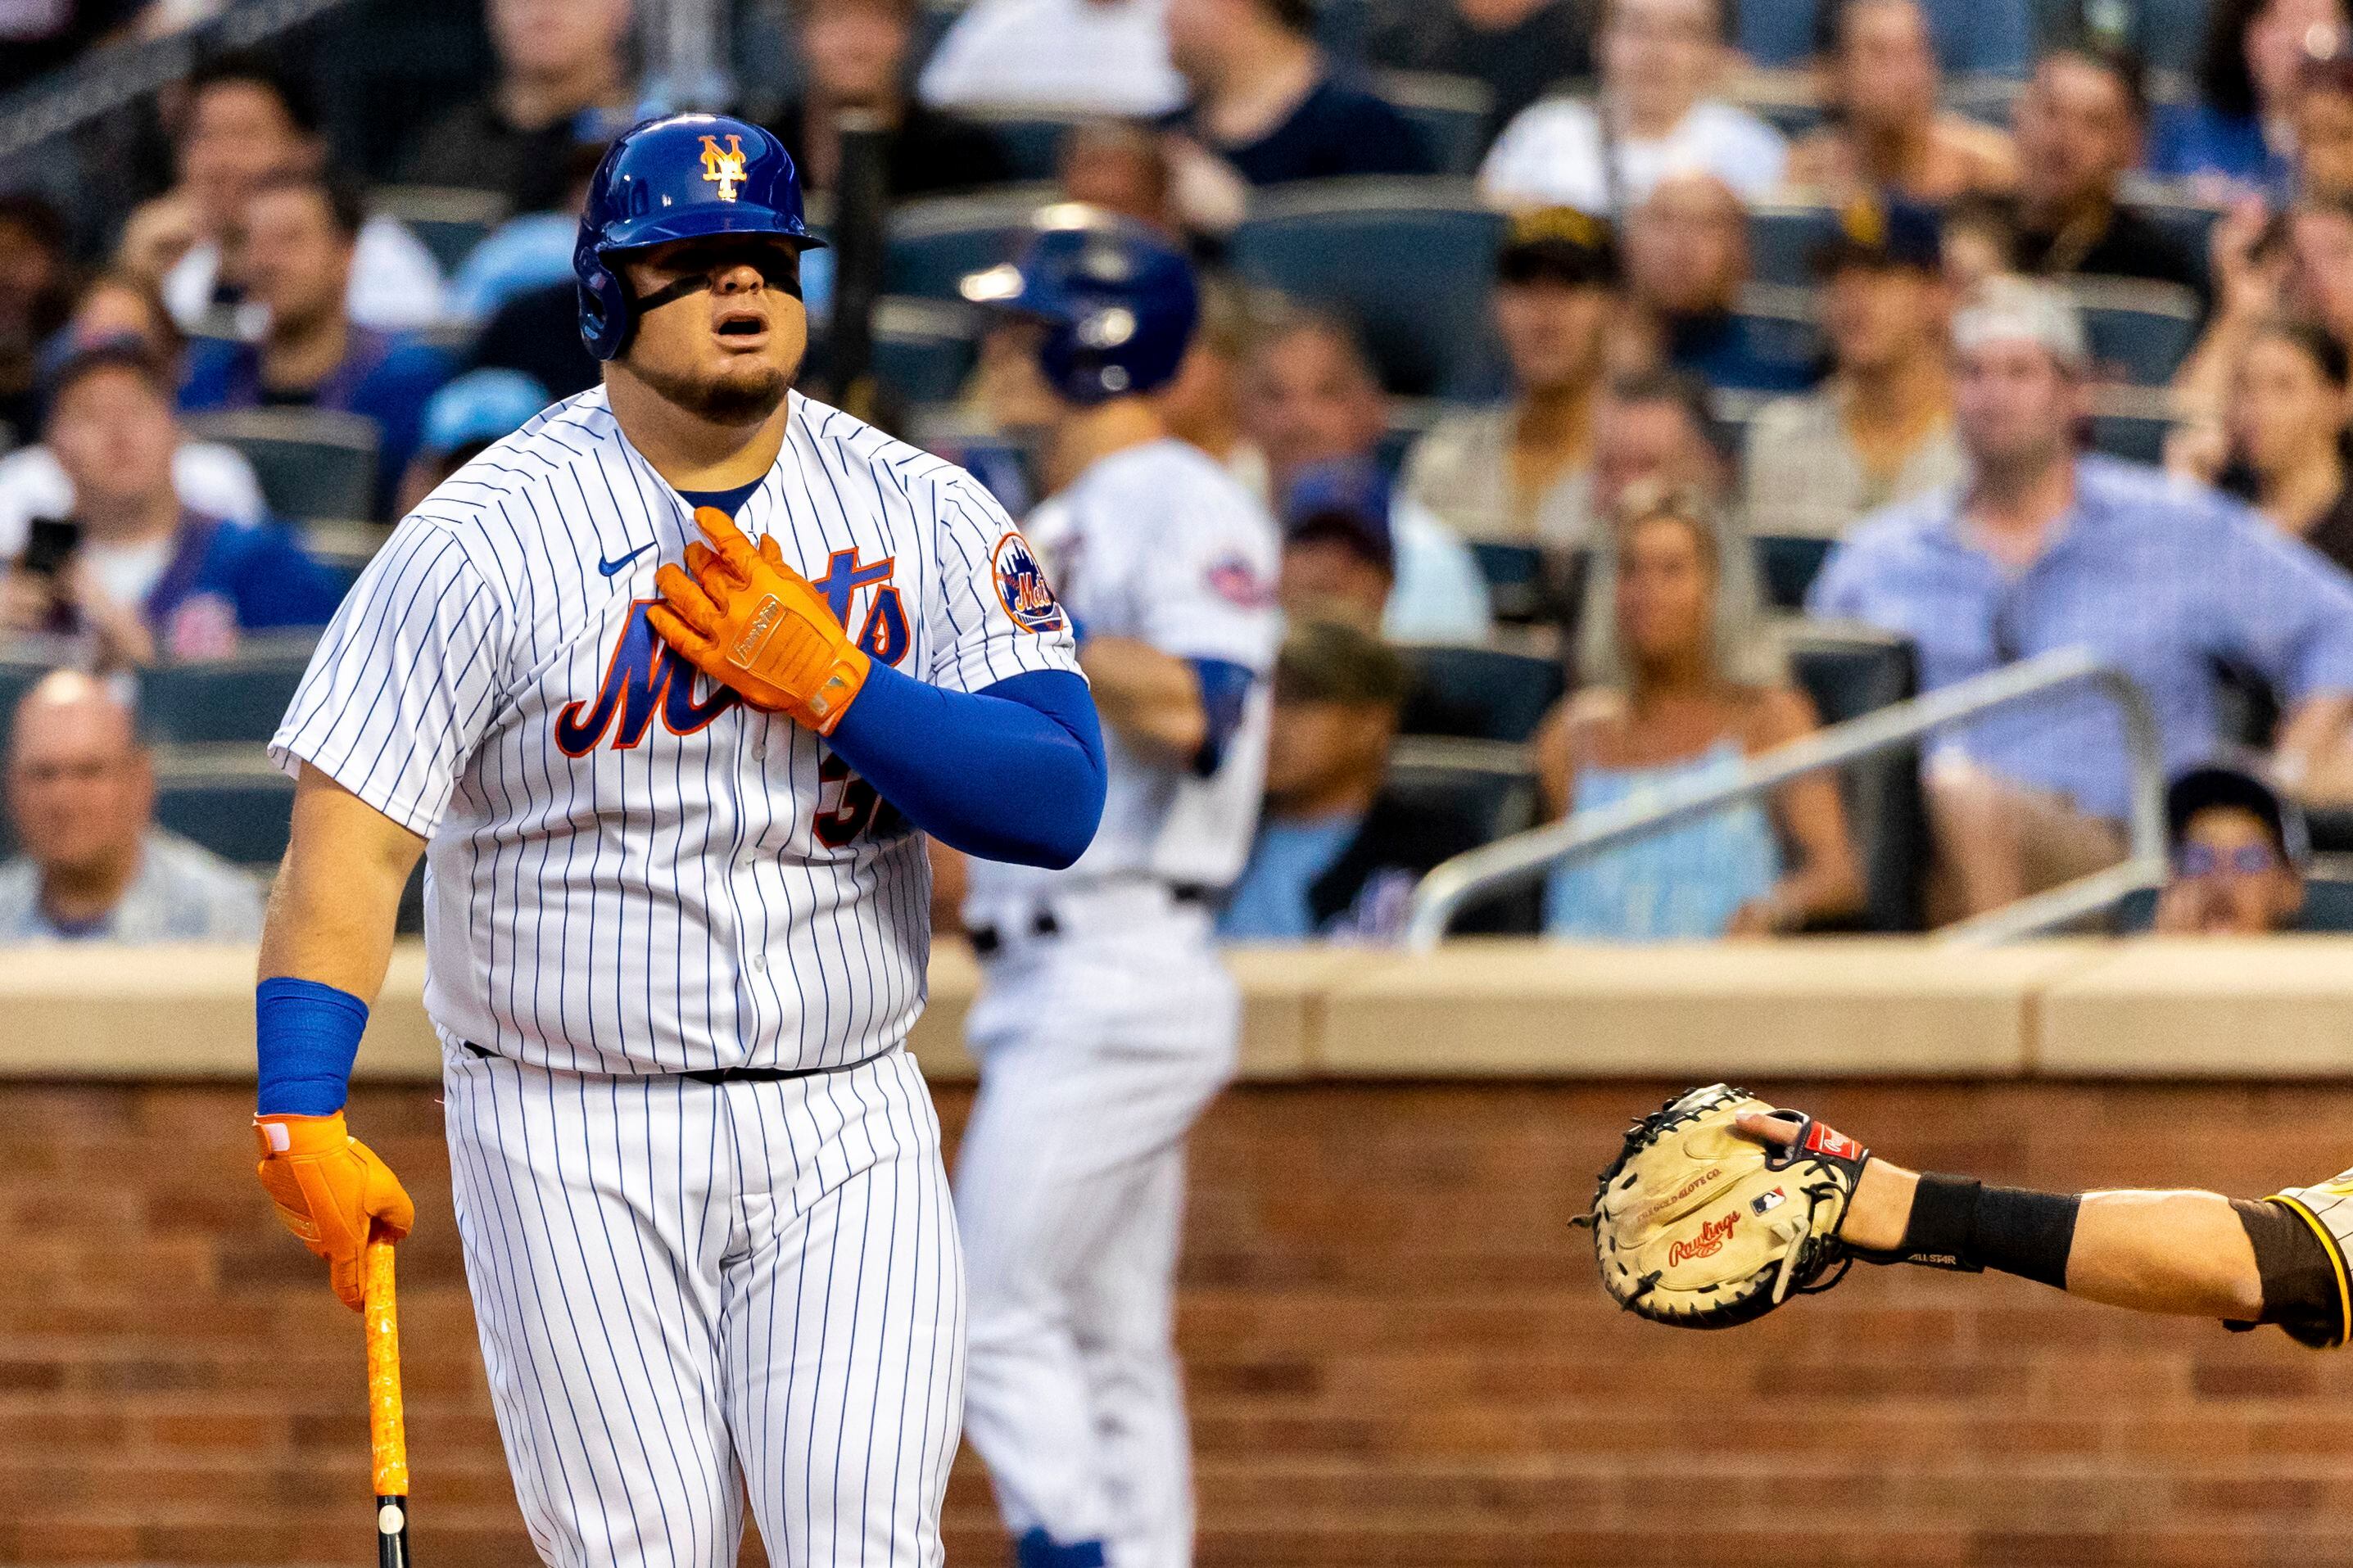 Alonso's 3-run HR, 4 RBIs leads Mets over Padres 8-5